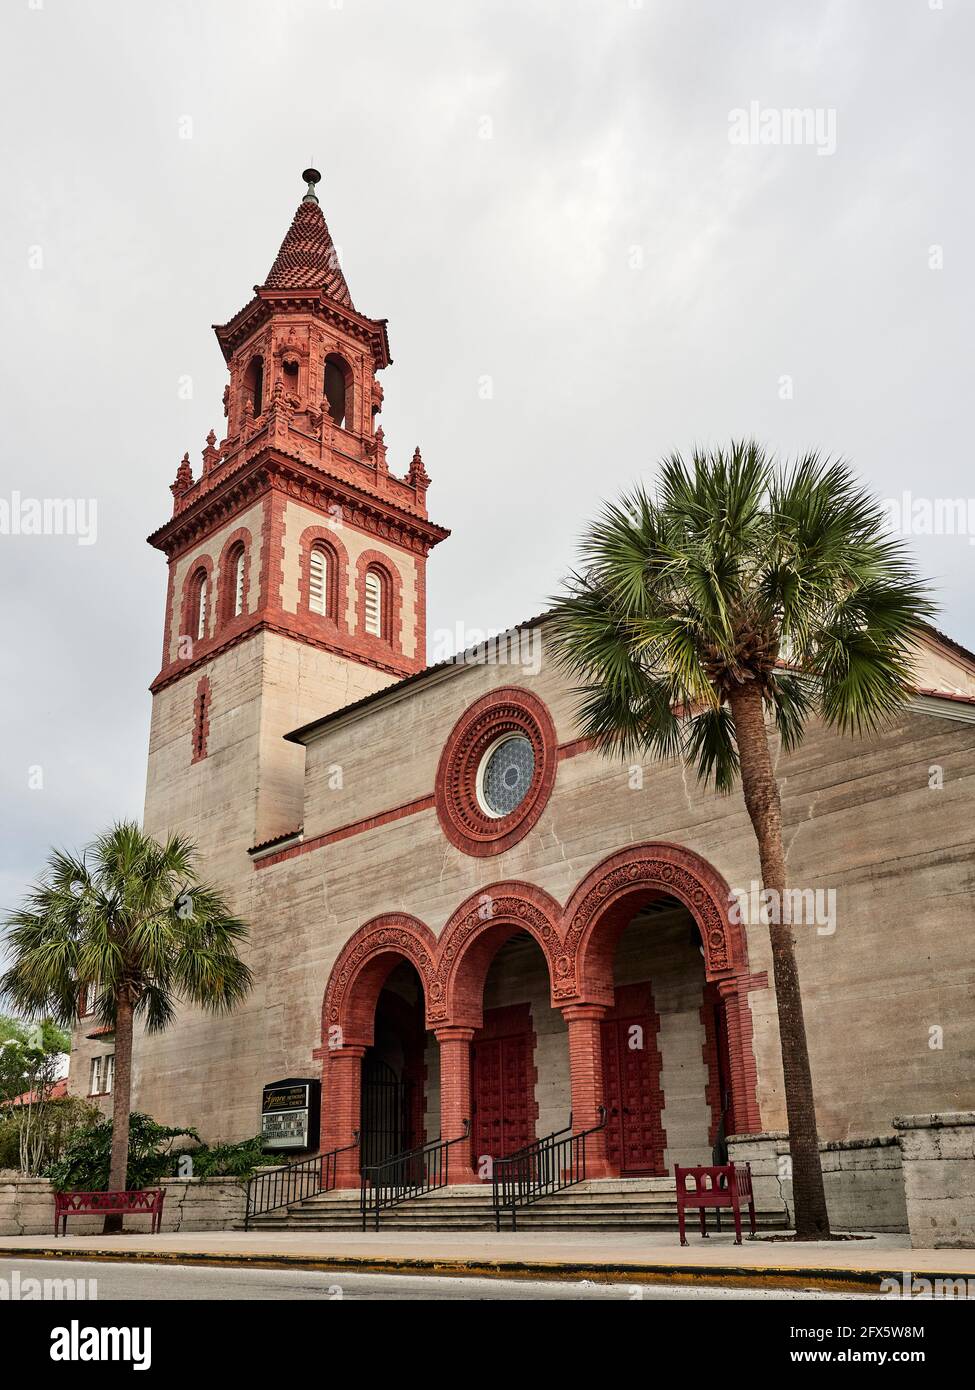 Grace United Methodist Church in the daytime in old town St Augustine Florida, USA. Stock Photo